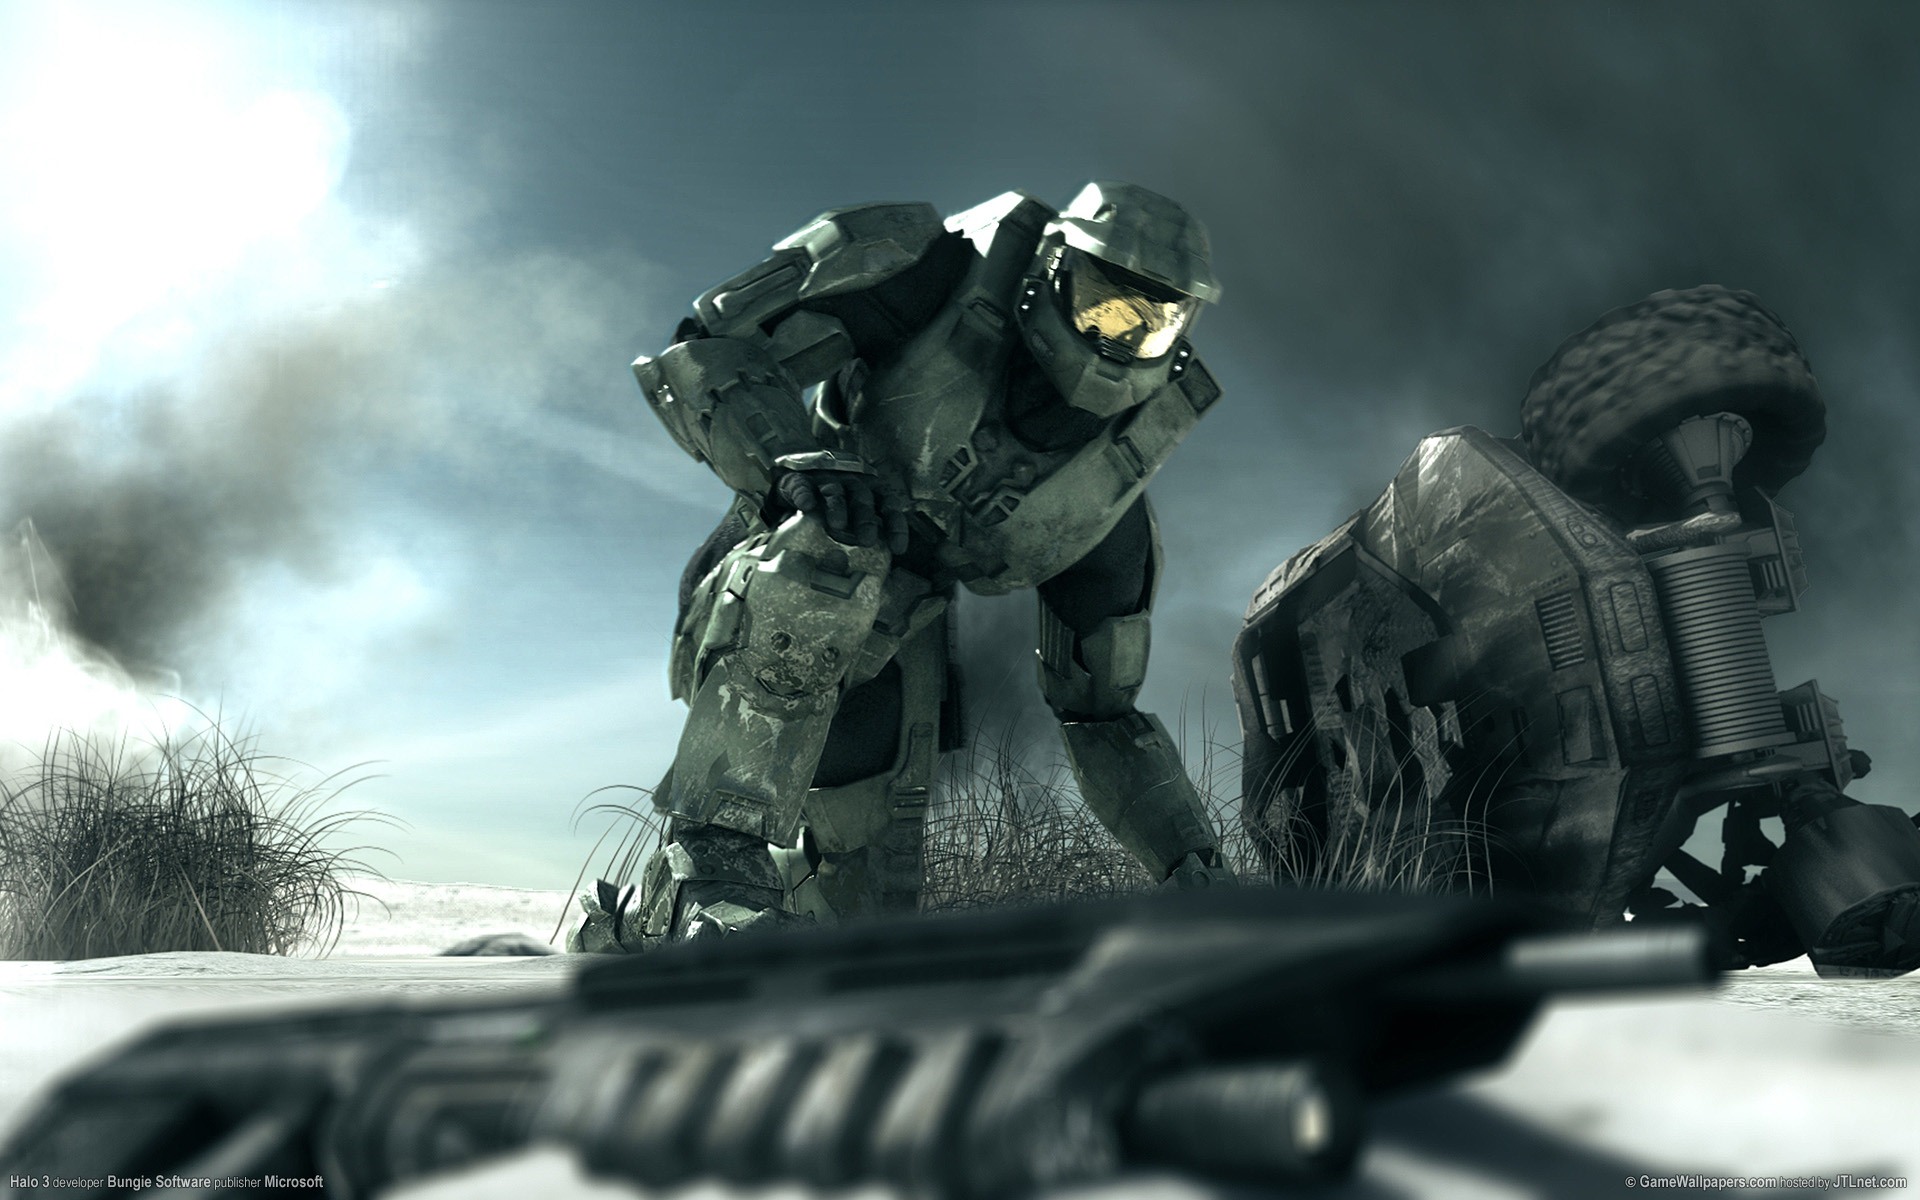 Halo game HD wallpapers #21 - 1920x1200